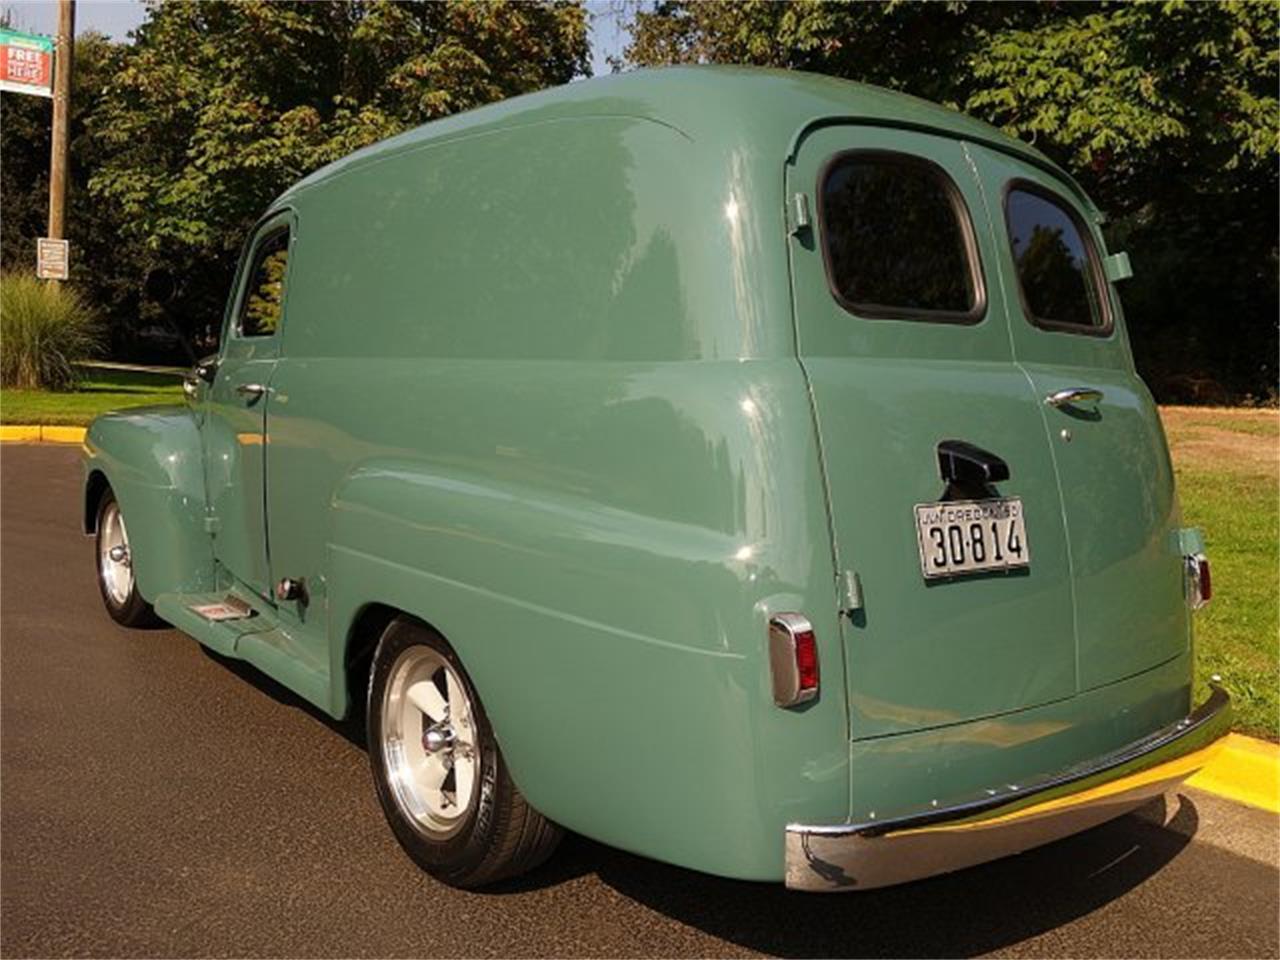 1950 Ford Panel Truck for Sale | ClassicCars.com | CC-1109433